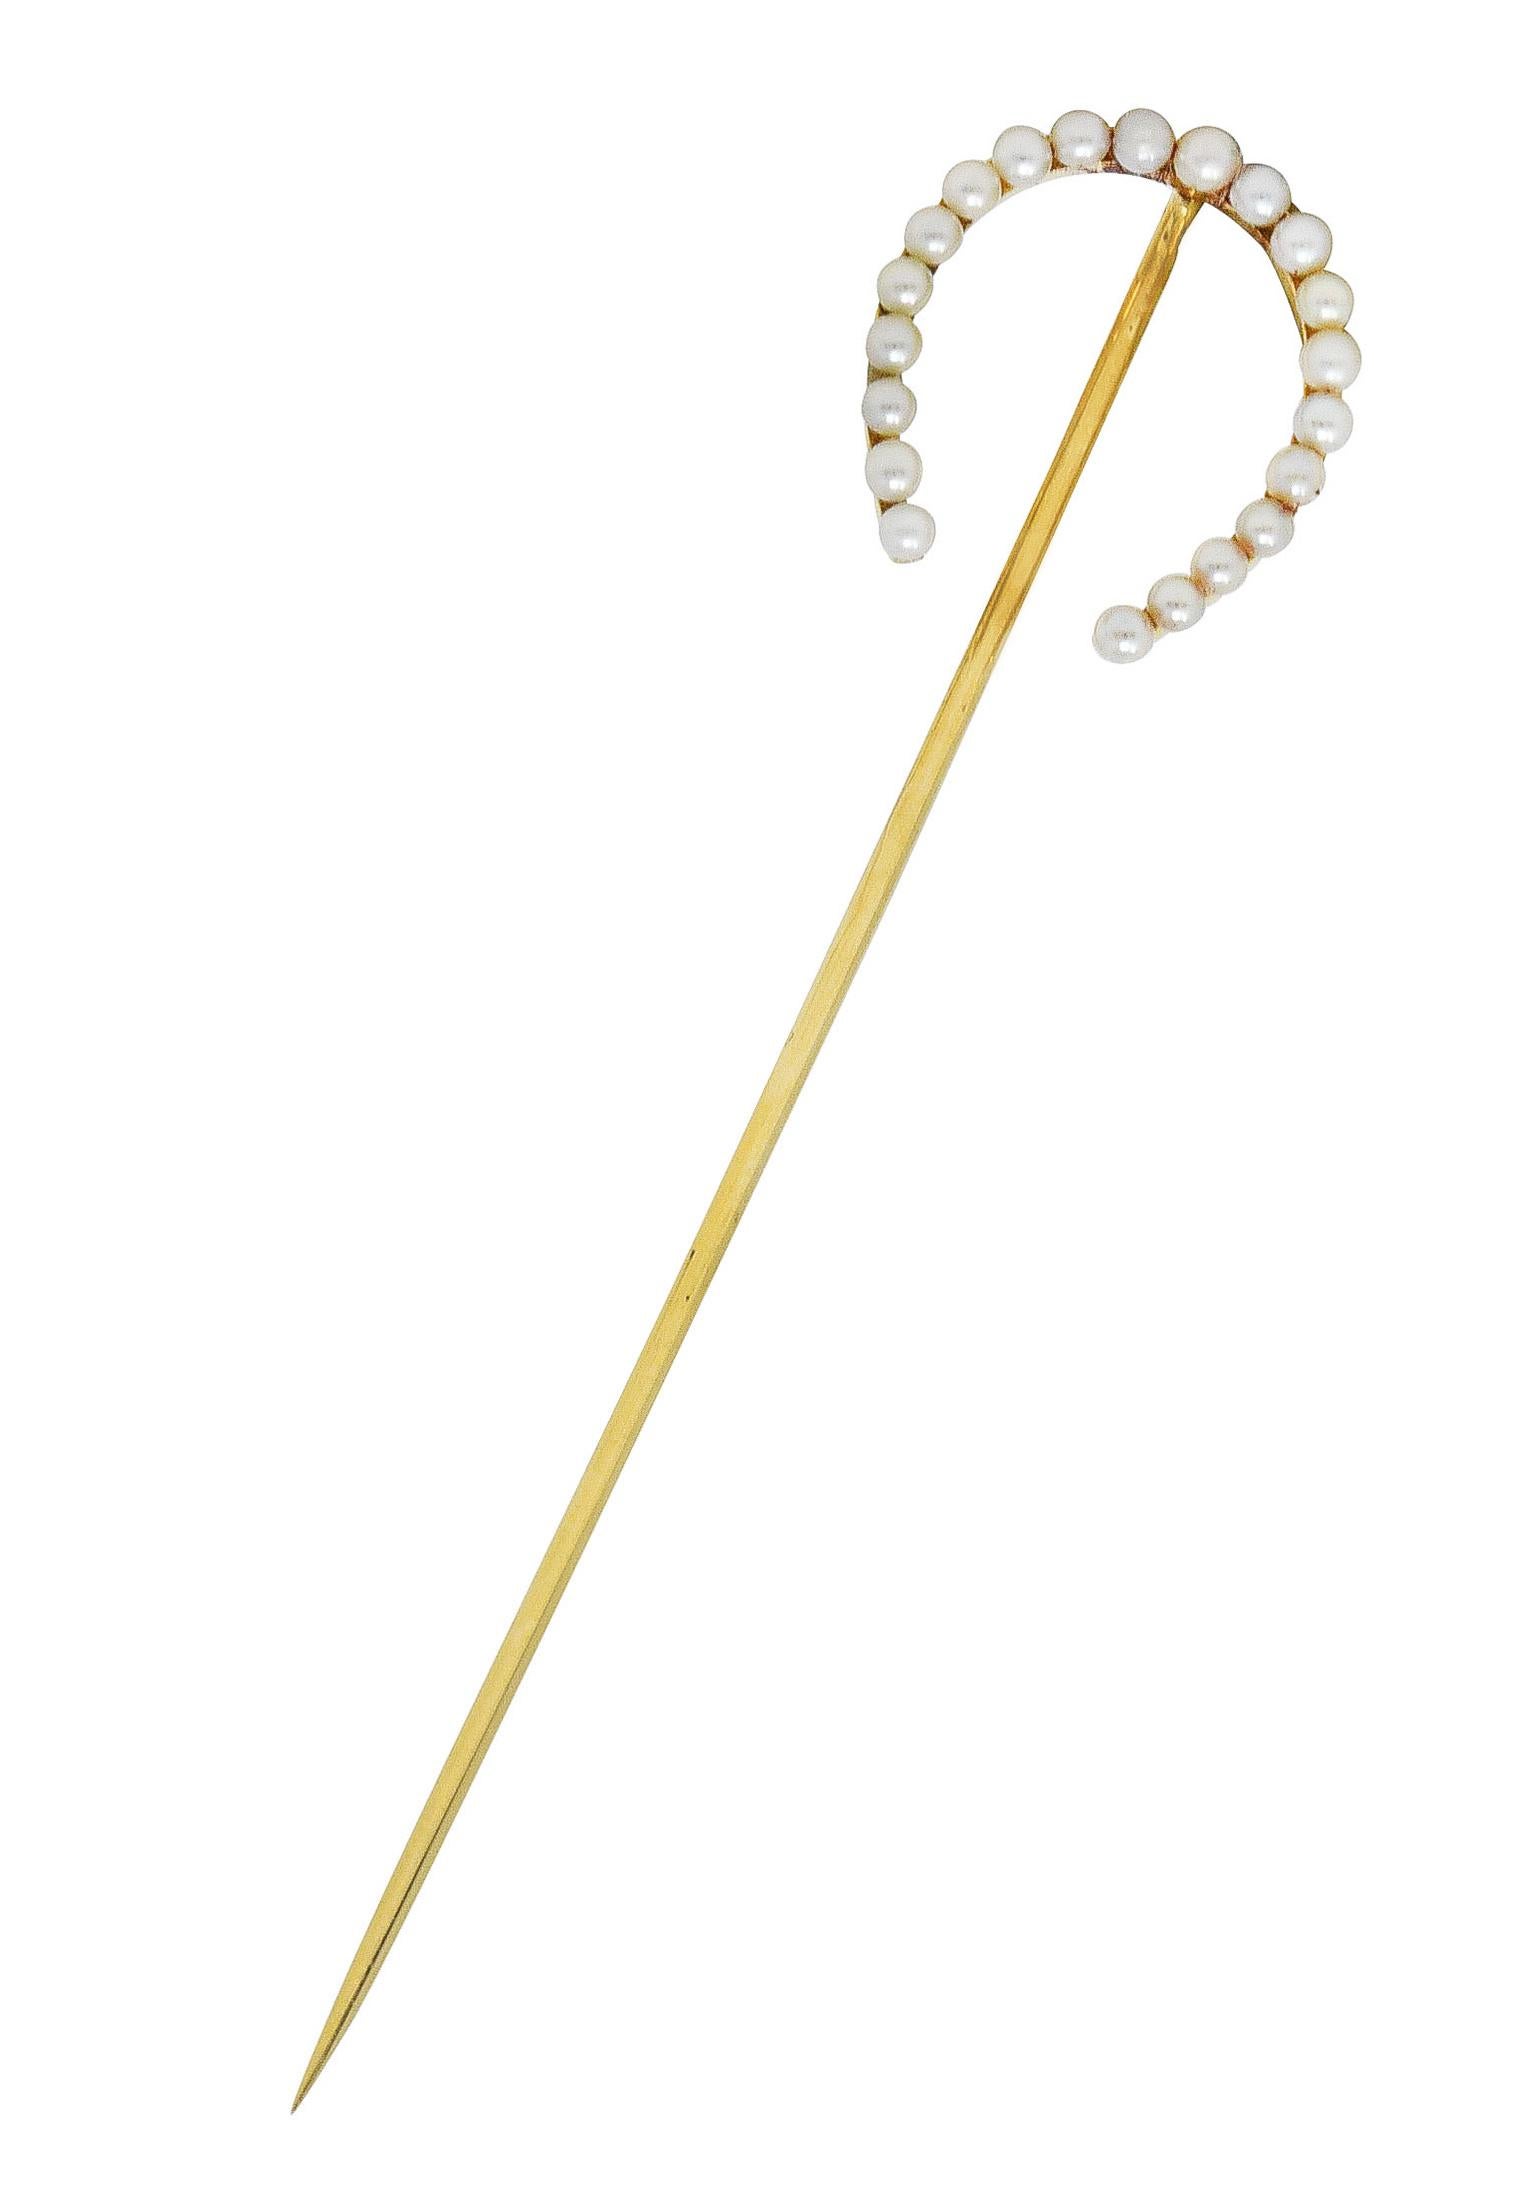 Stickpin is designed as a horseshoe form with seed pearls throughout. Ranging in size from 1.95 to 2.25 mm - white to cream in body color with subtle iridescence. Stamped 14k for 14 karat gold. Circa: 1910. Horseshoe measures: 5/8 x 3/4 inch. Total